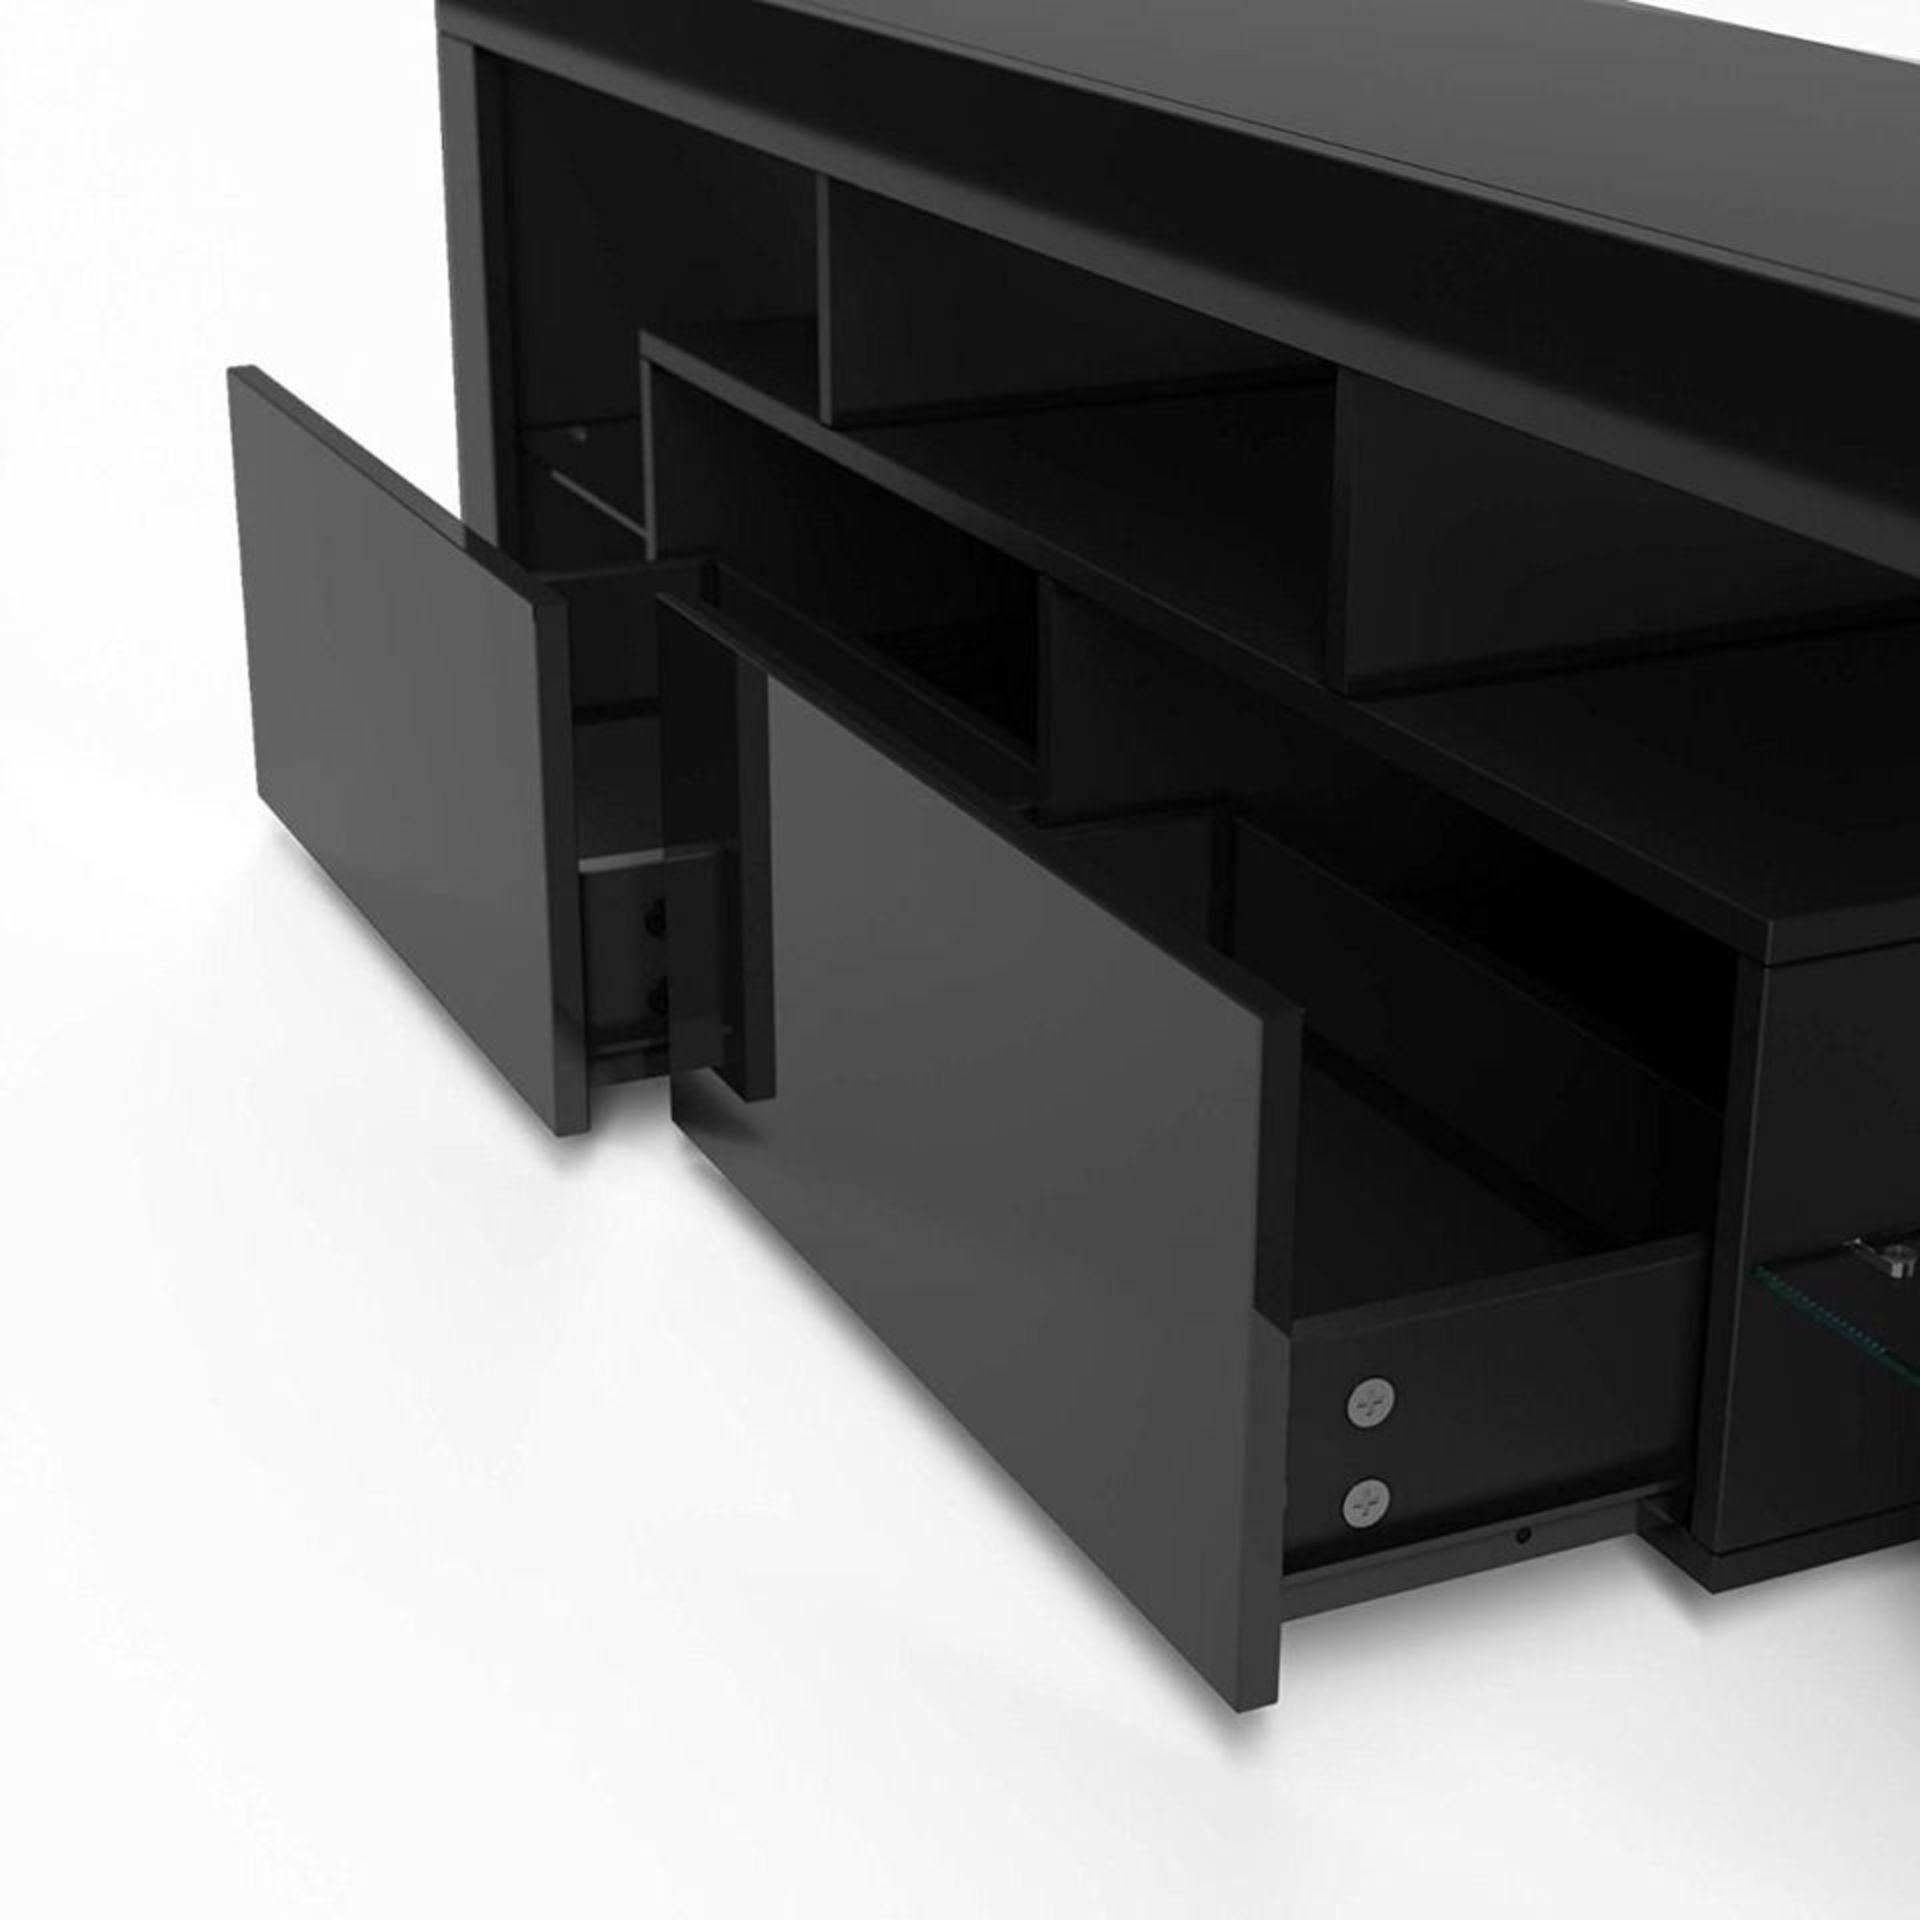 MODERN 160CM TV UNIT CABINET TV STAND HIGH GLOSS DOORS WITH FREE LEDS - Image 2 of 3